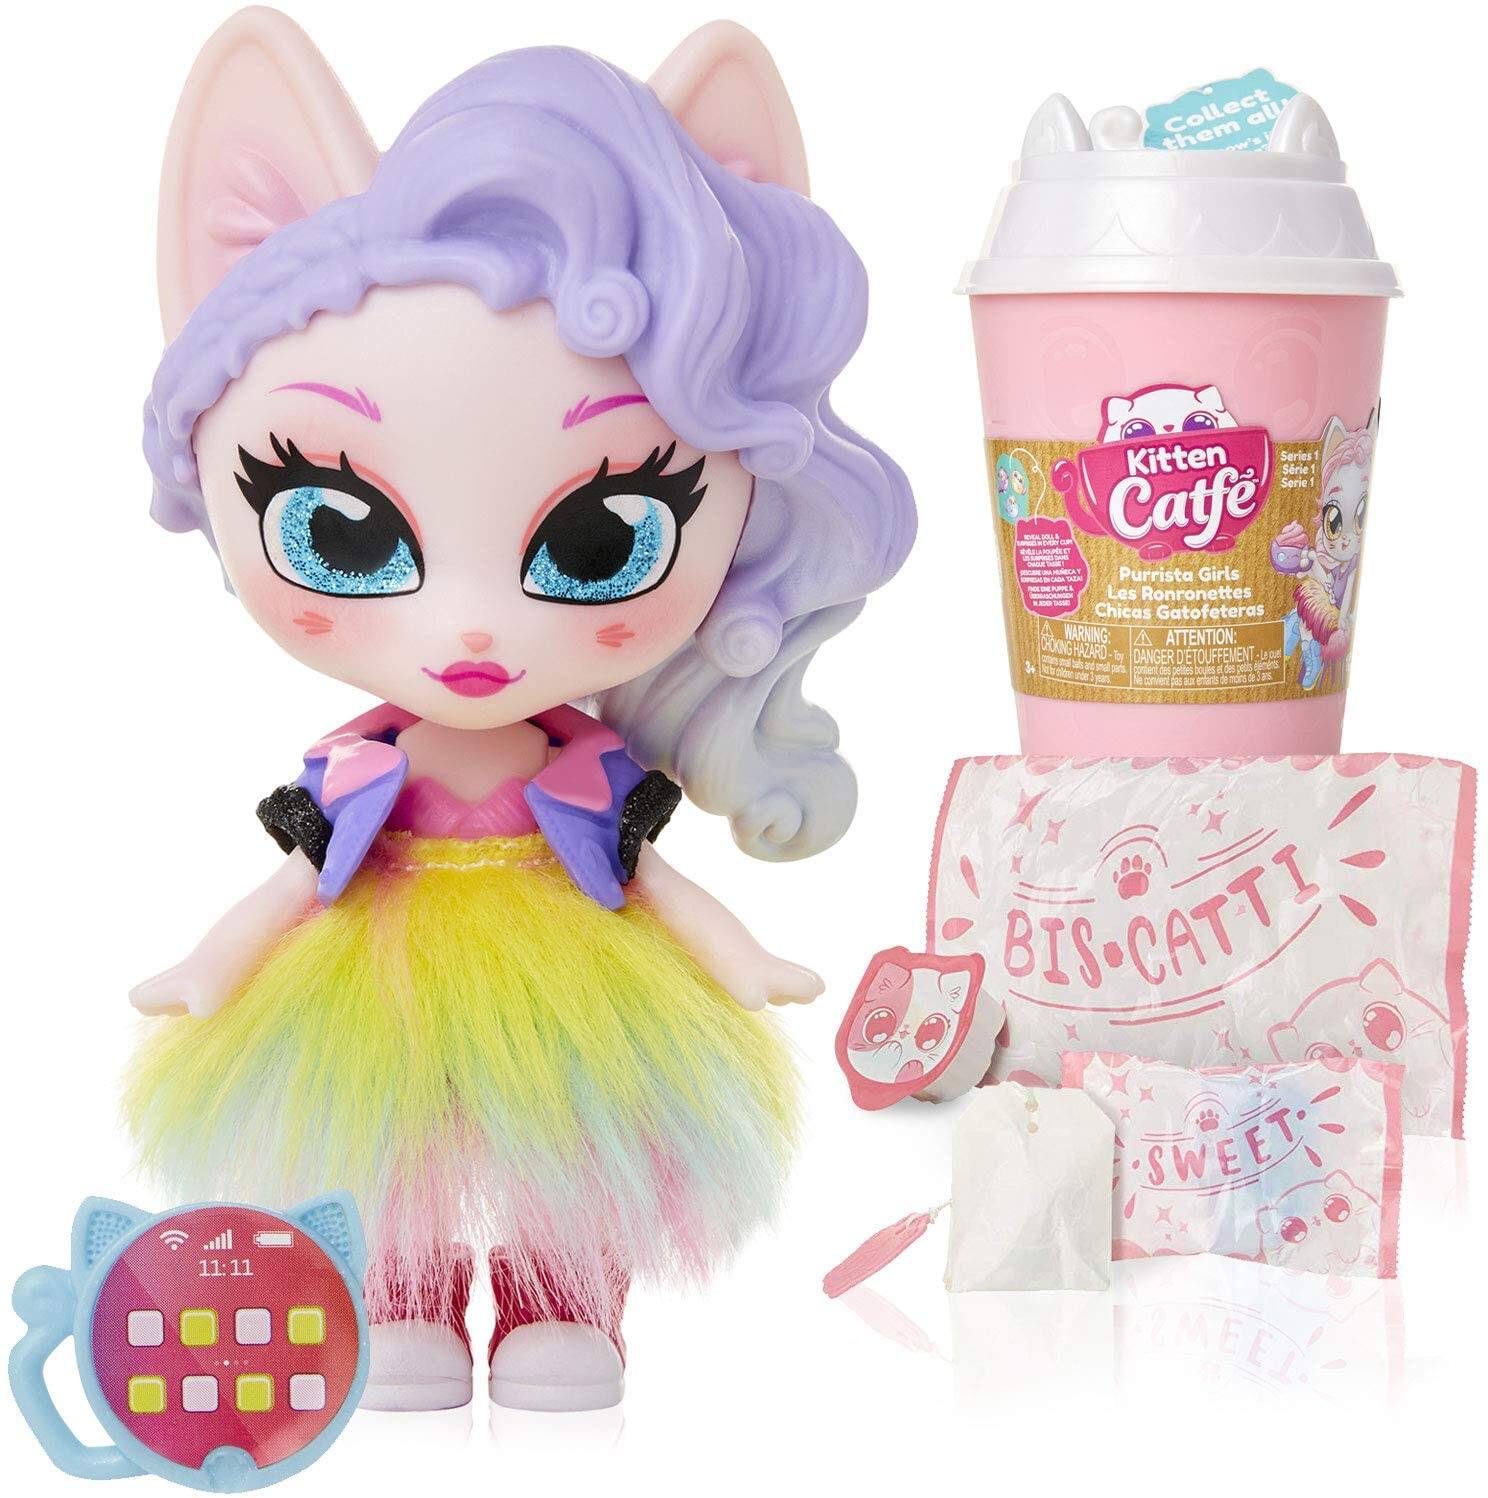 Kitten Catfé Purrista Doll Figure Series #1 Doll w/ Accessories $5 + Free Shipping w/ Prime or FS on $25+